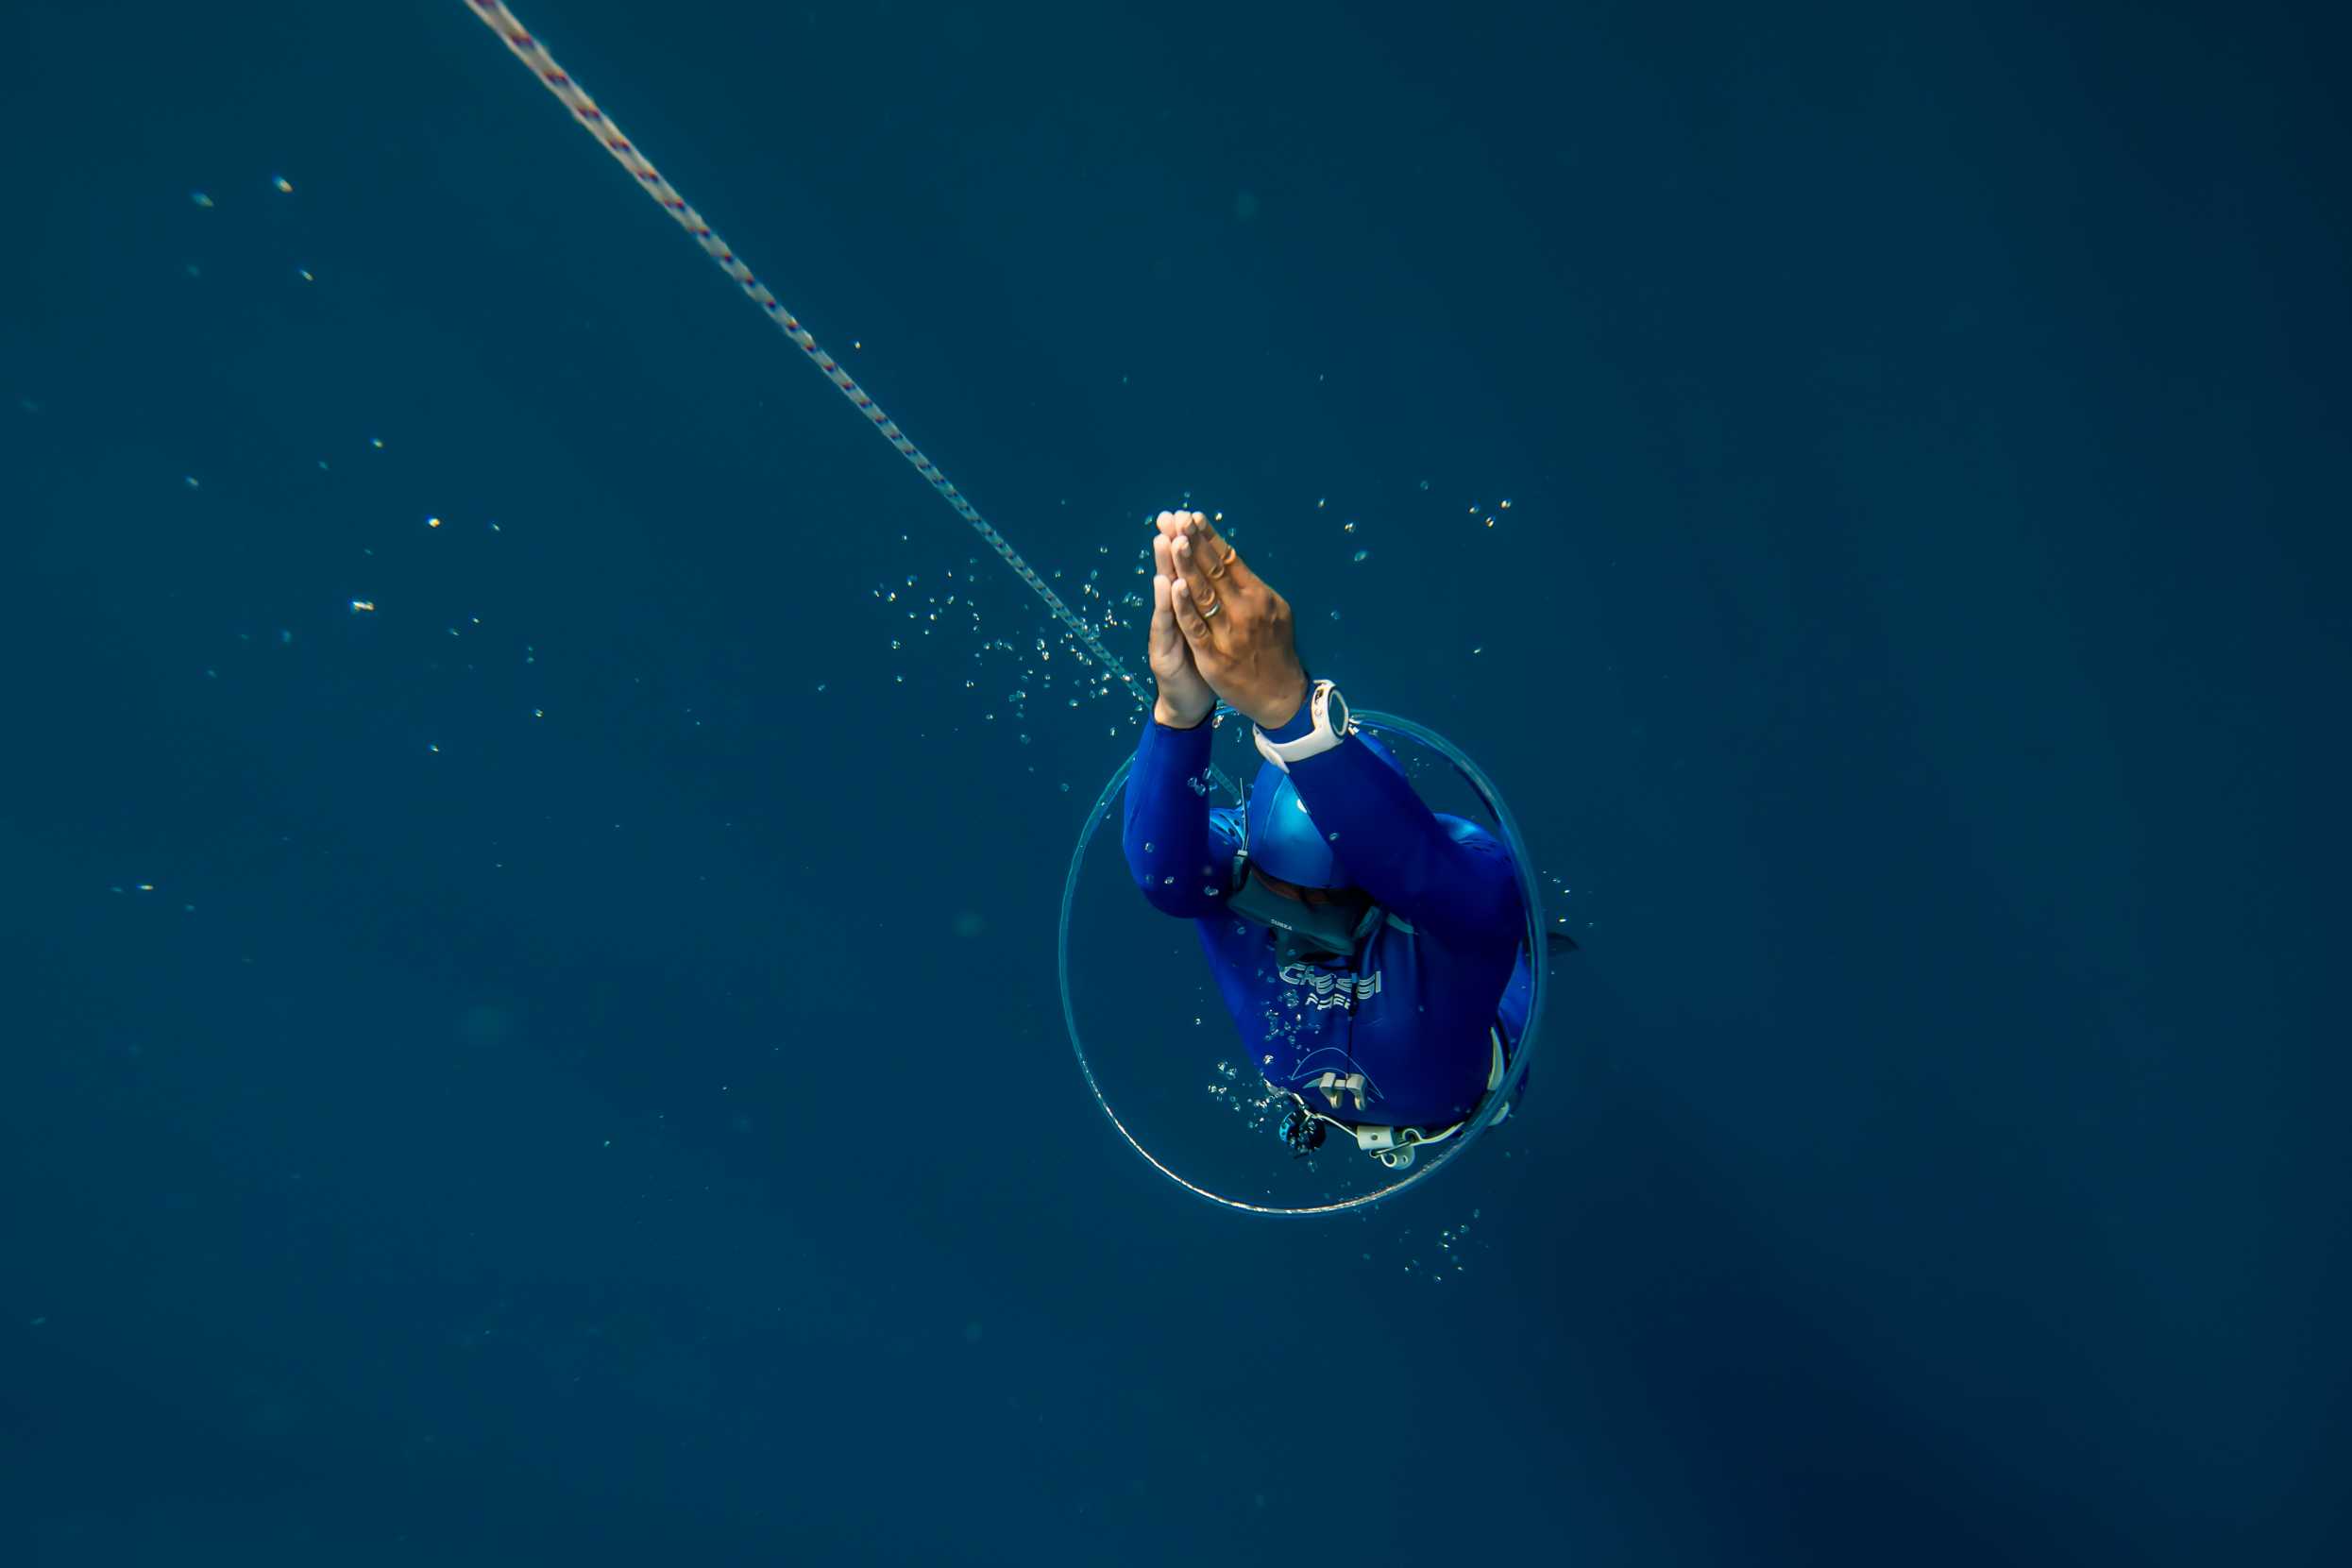 Mario Fernandes a freediver can hold his breath under water for almost 7 minutes. 